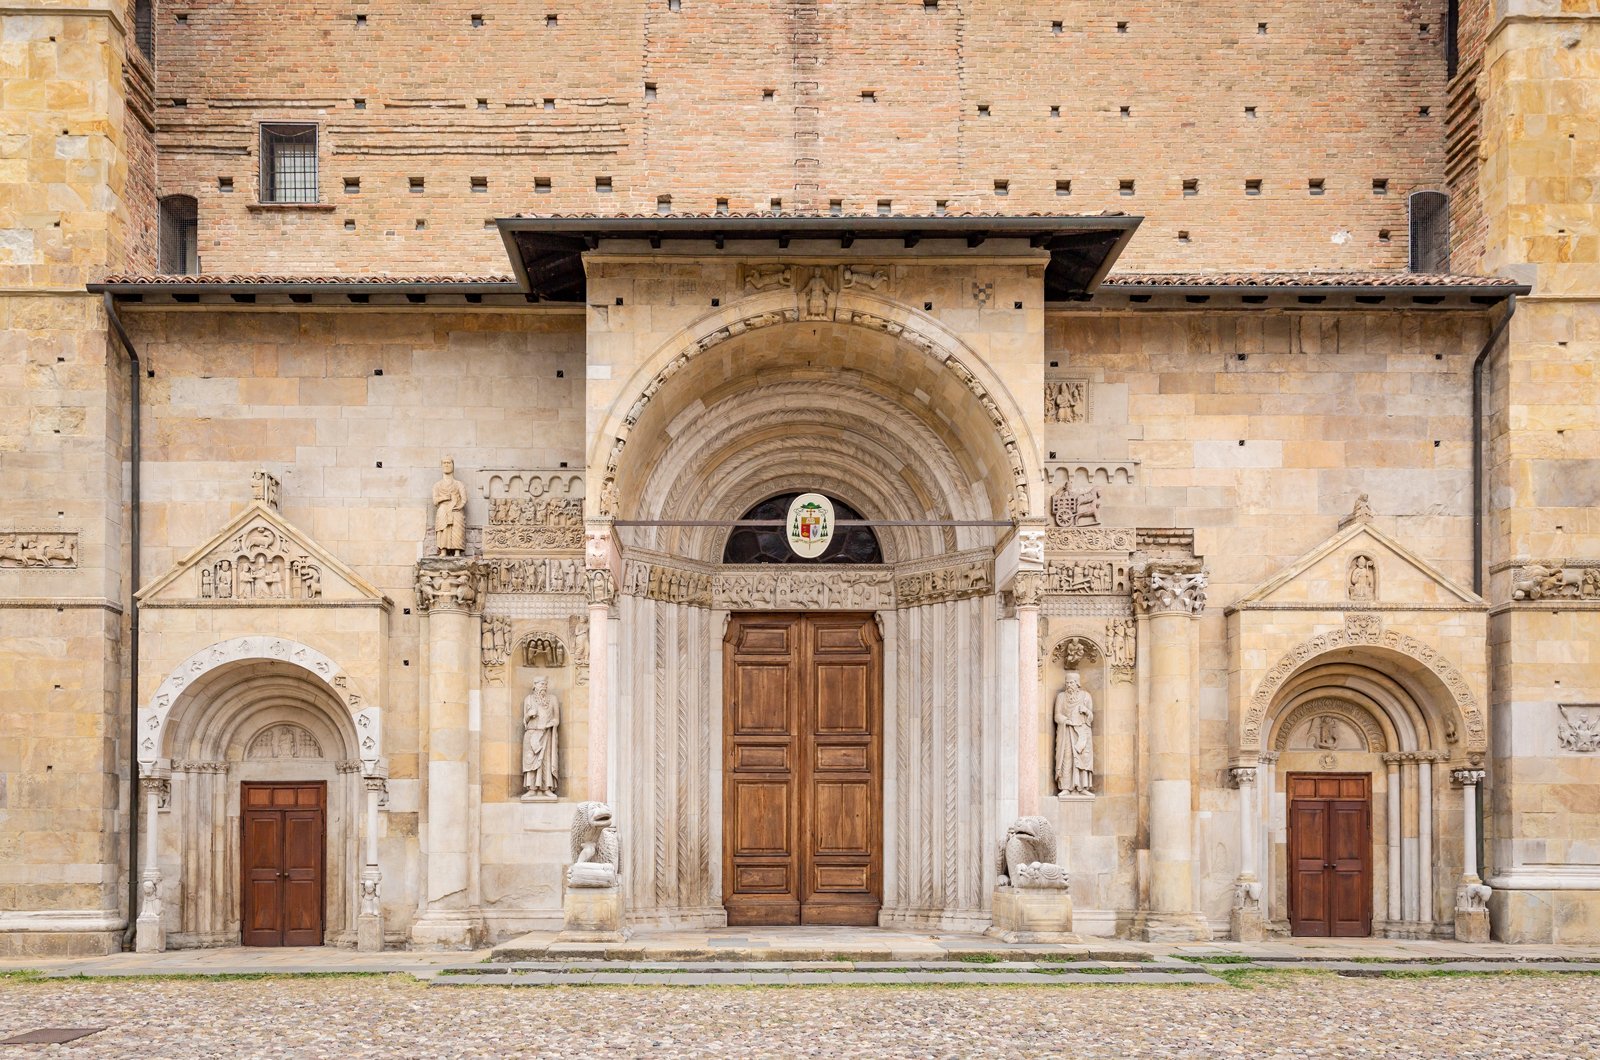 Fidenza is famed for its superlative Romanesque sculpture